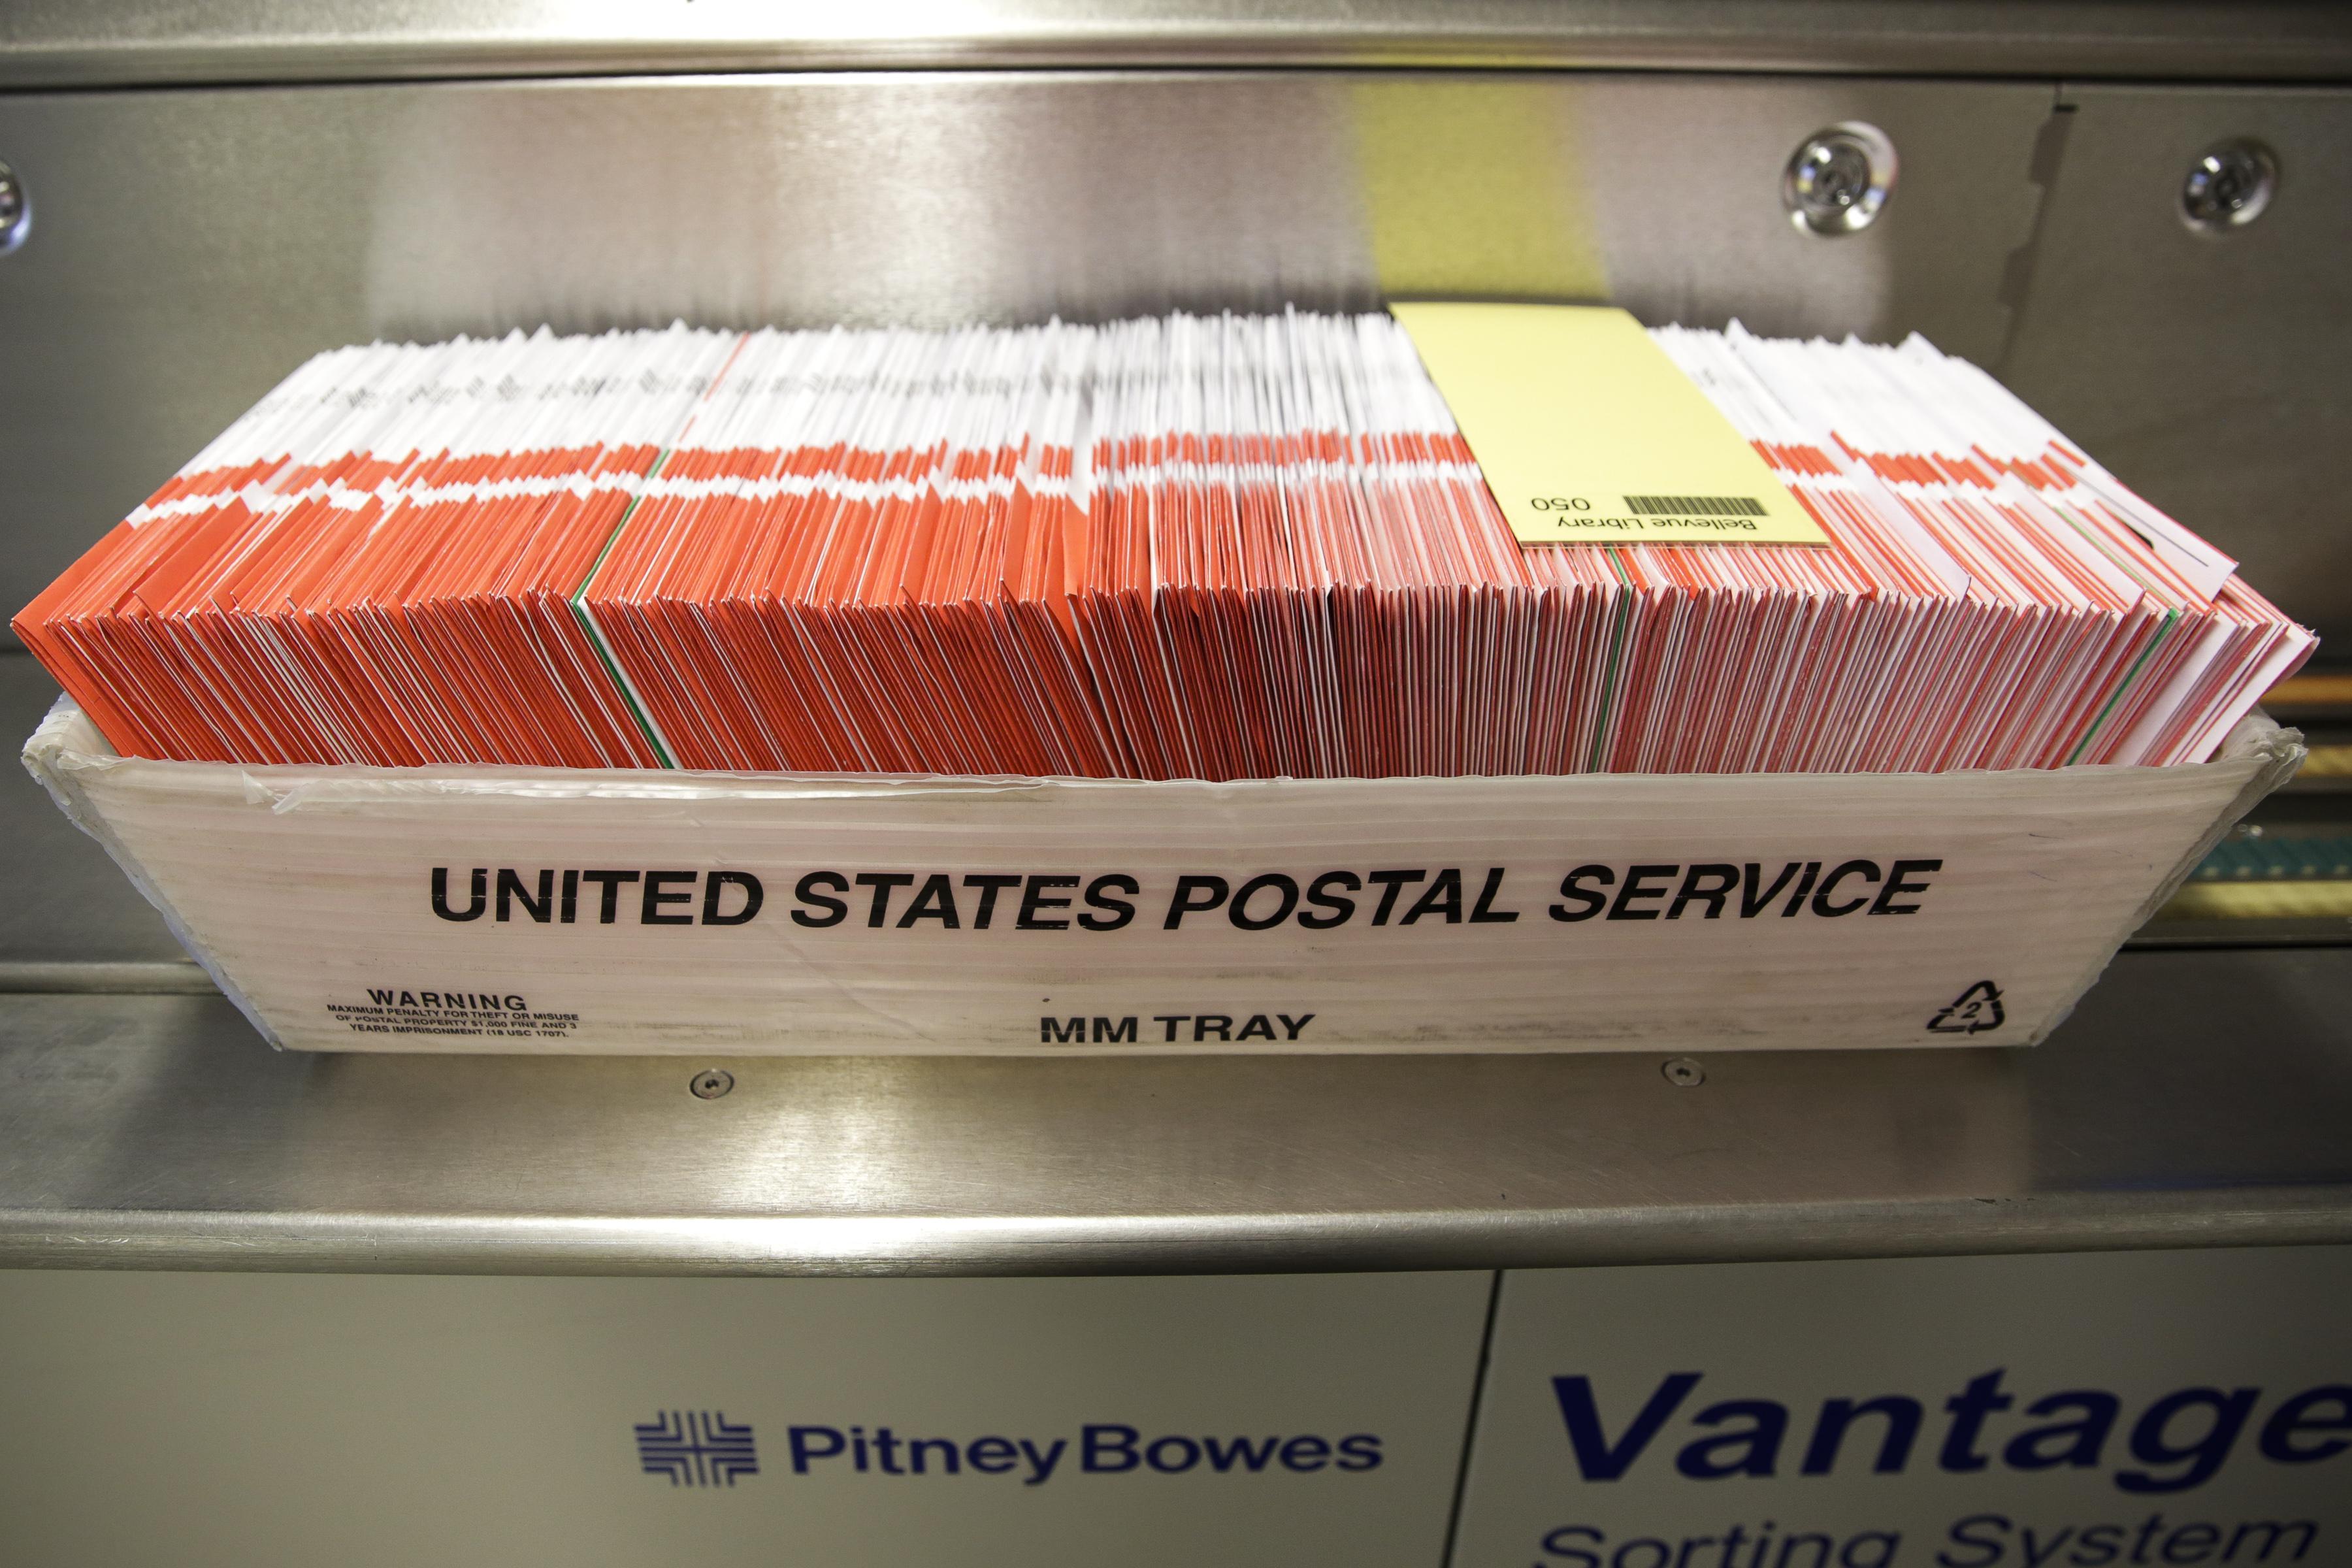 A box of ballots to be sorted are pictured in a U.S. Postal Service box.